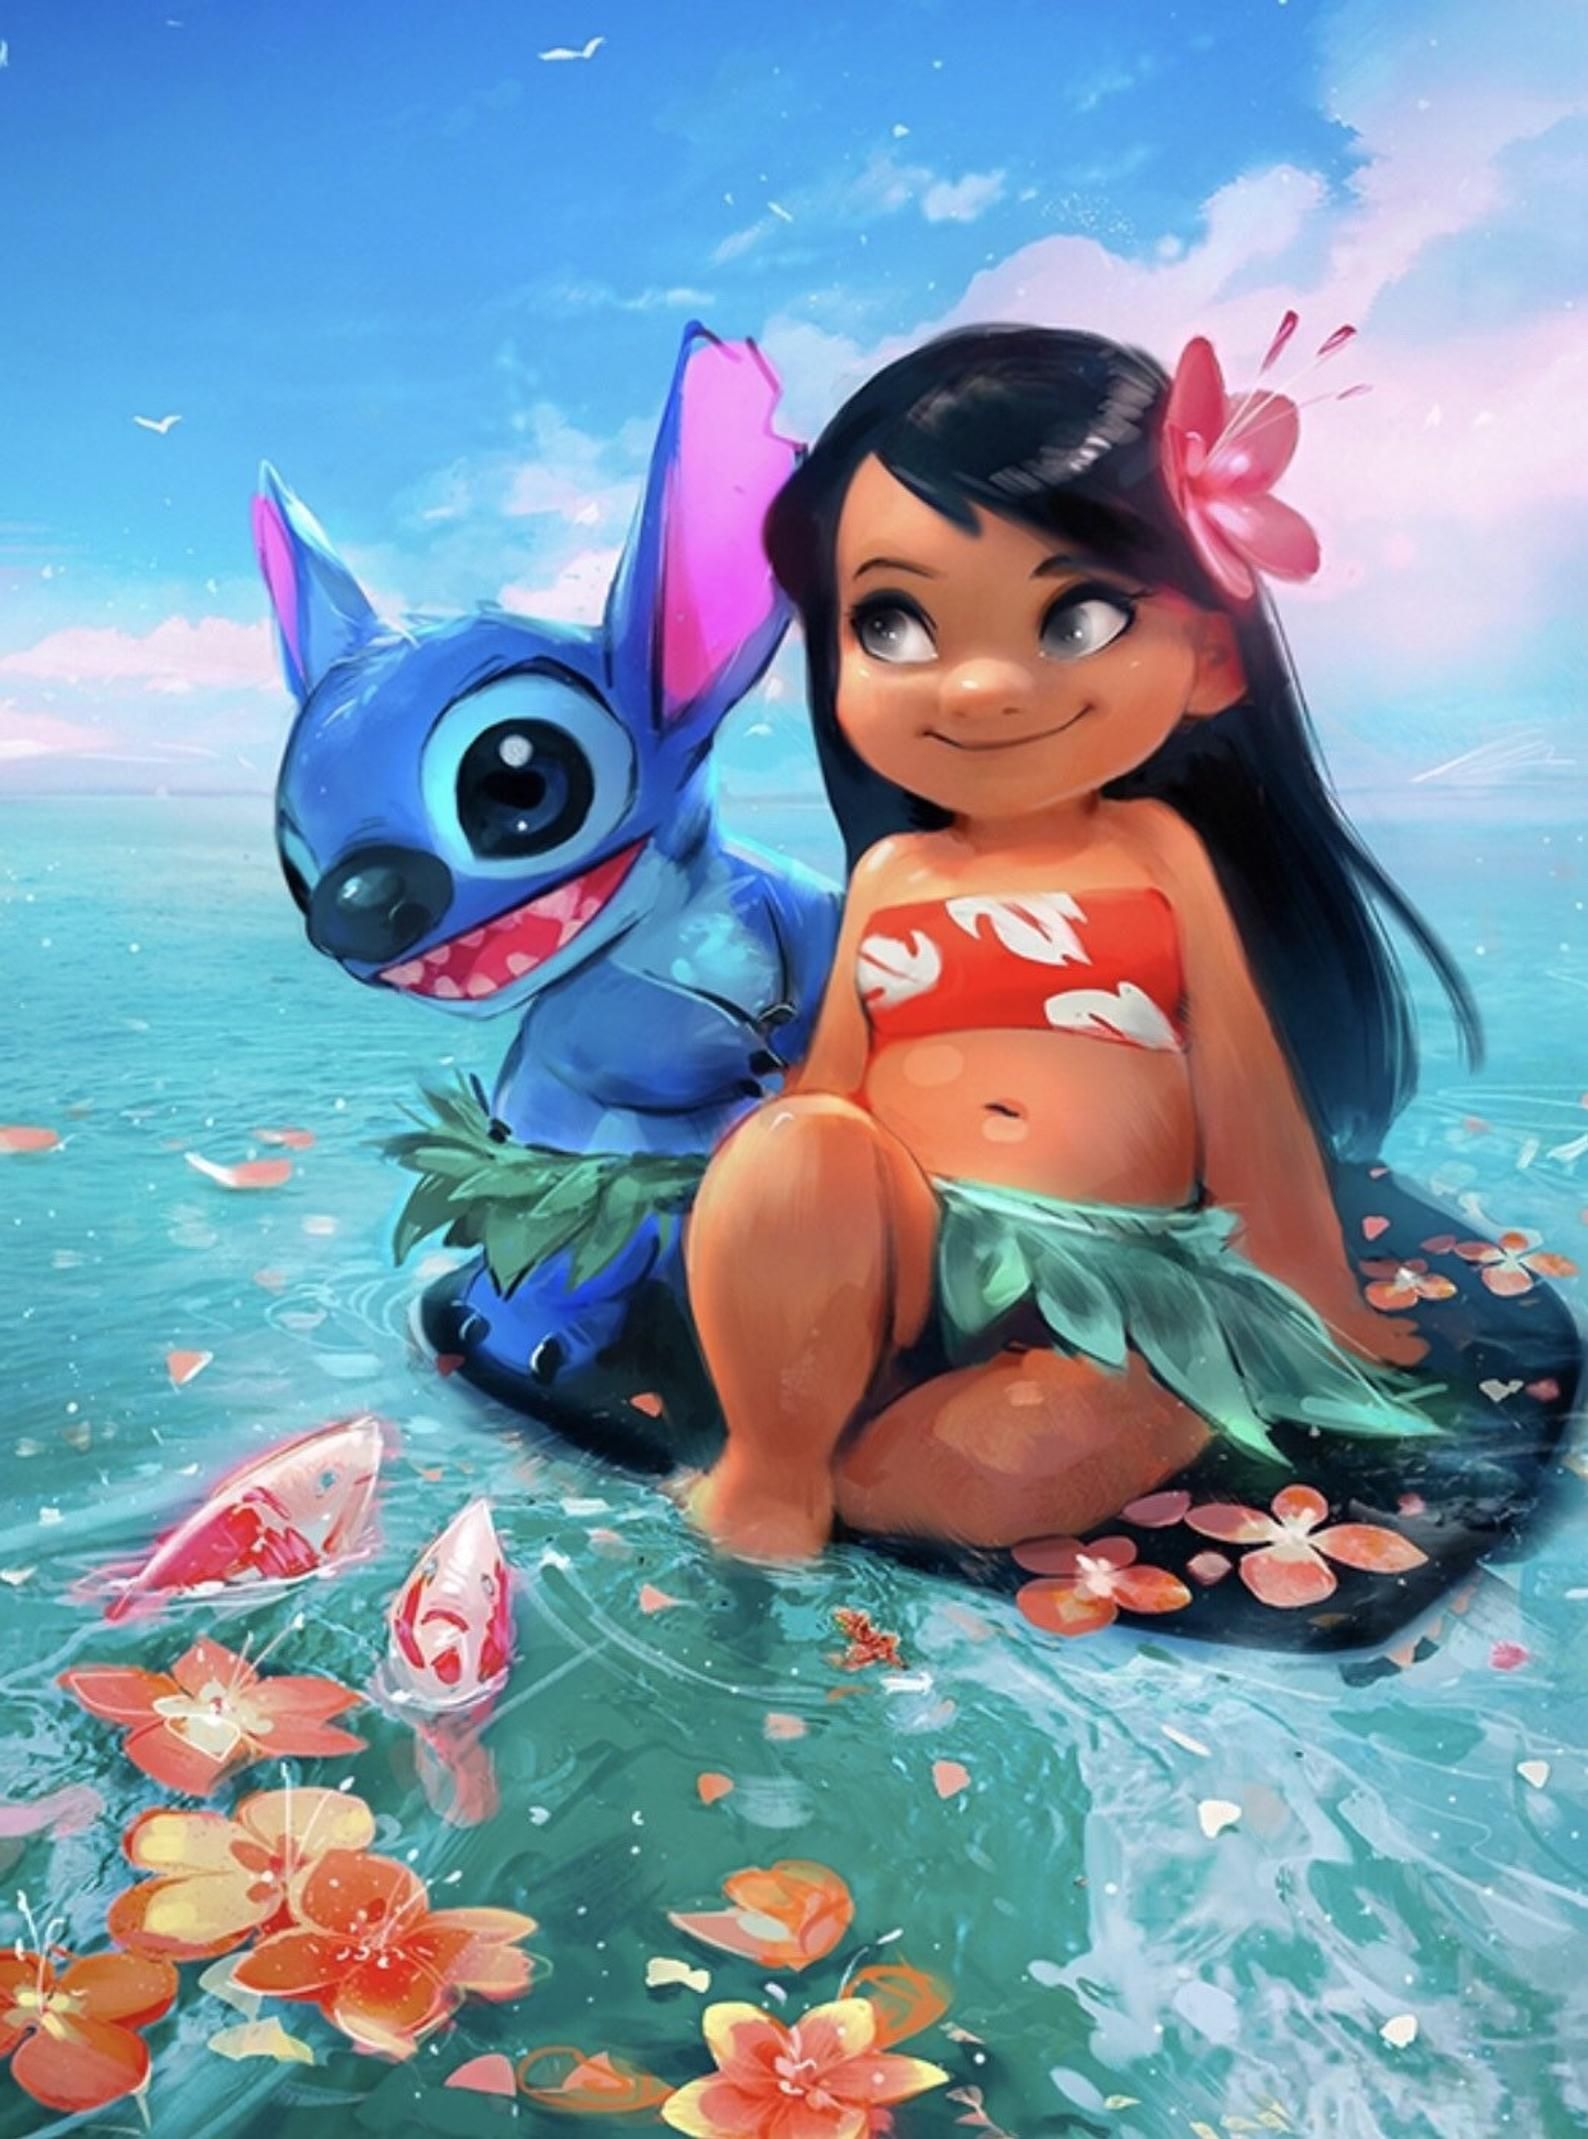 Lilo and Stitche costume Lilo Stitche outfit Halloween costume 2018 kids pool party kids birthday. Disney collage, Disney drawings, Lilo and stitch drawings